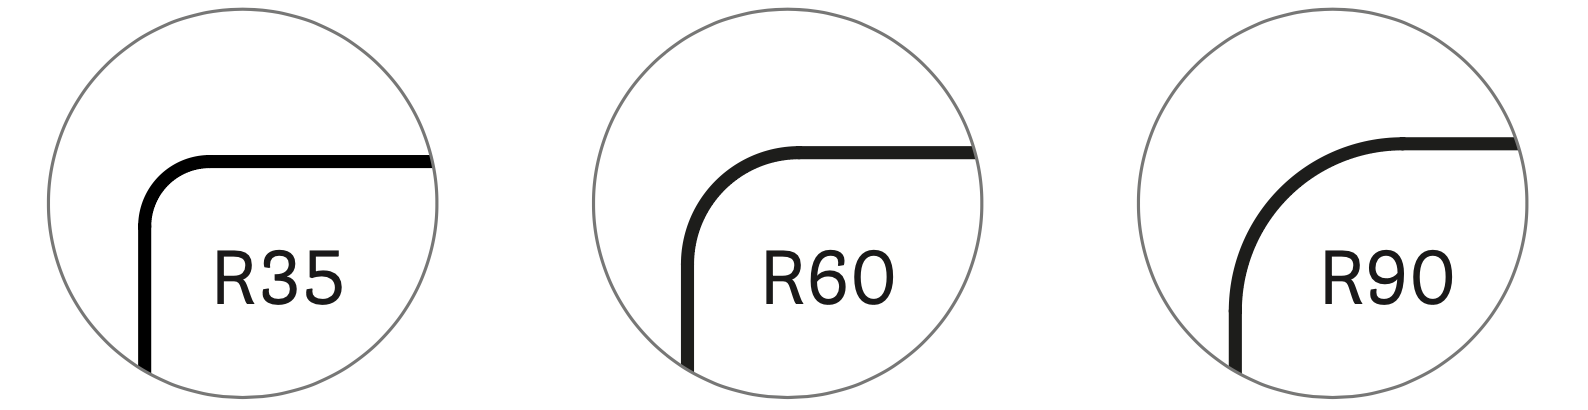 Rounded corners